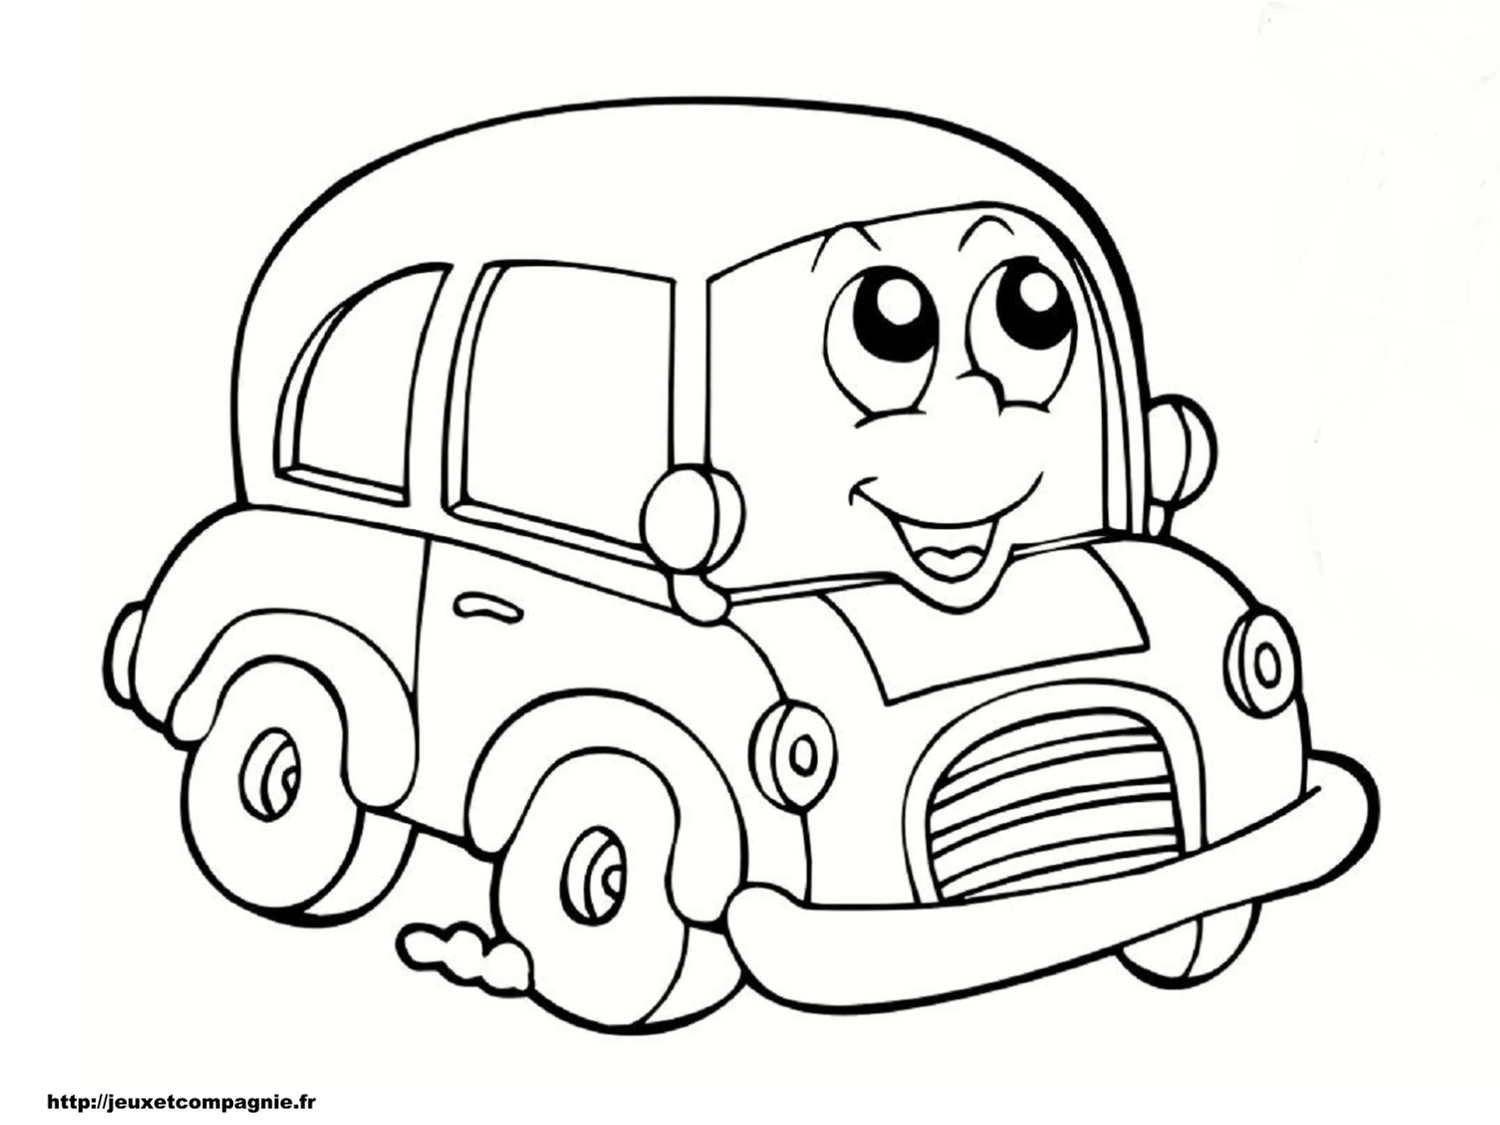 Car to color for children - Car Kids Coloring Pages